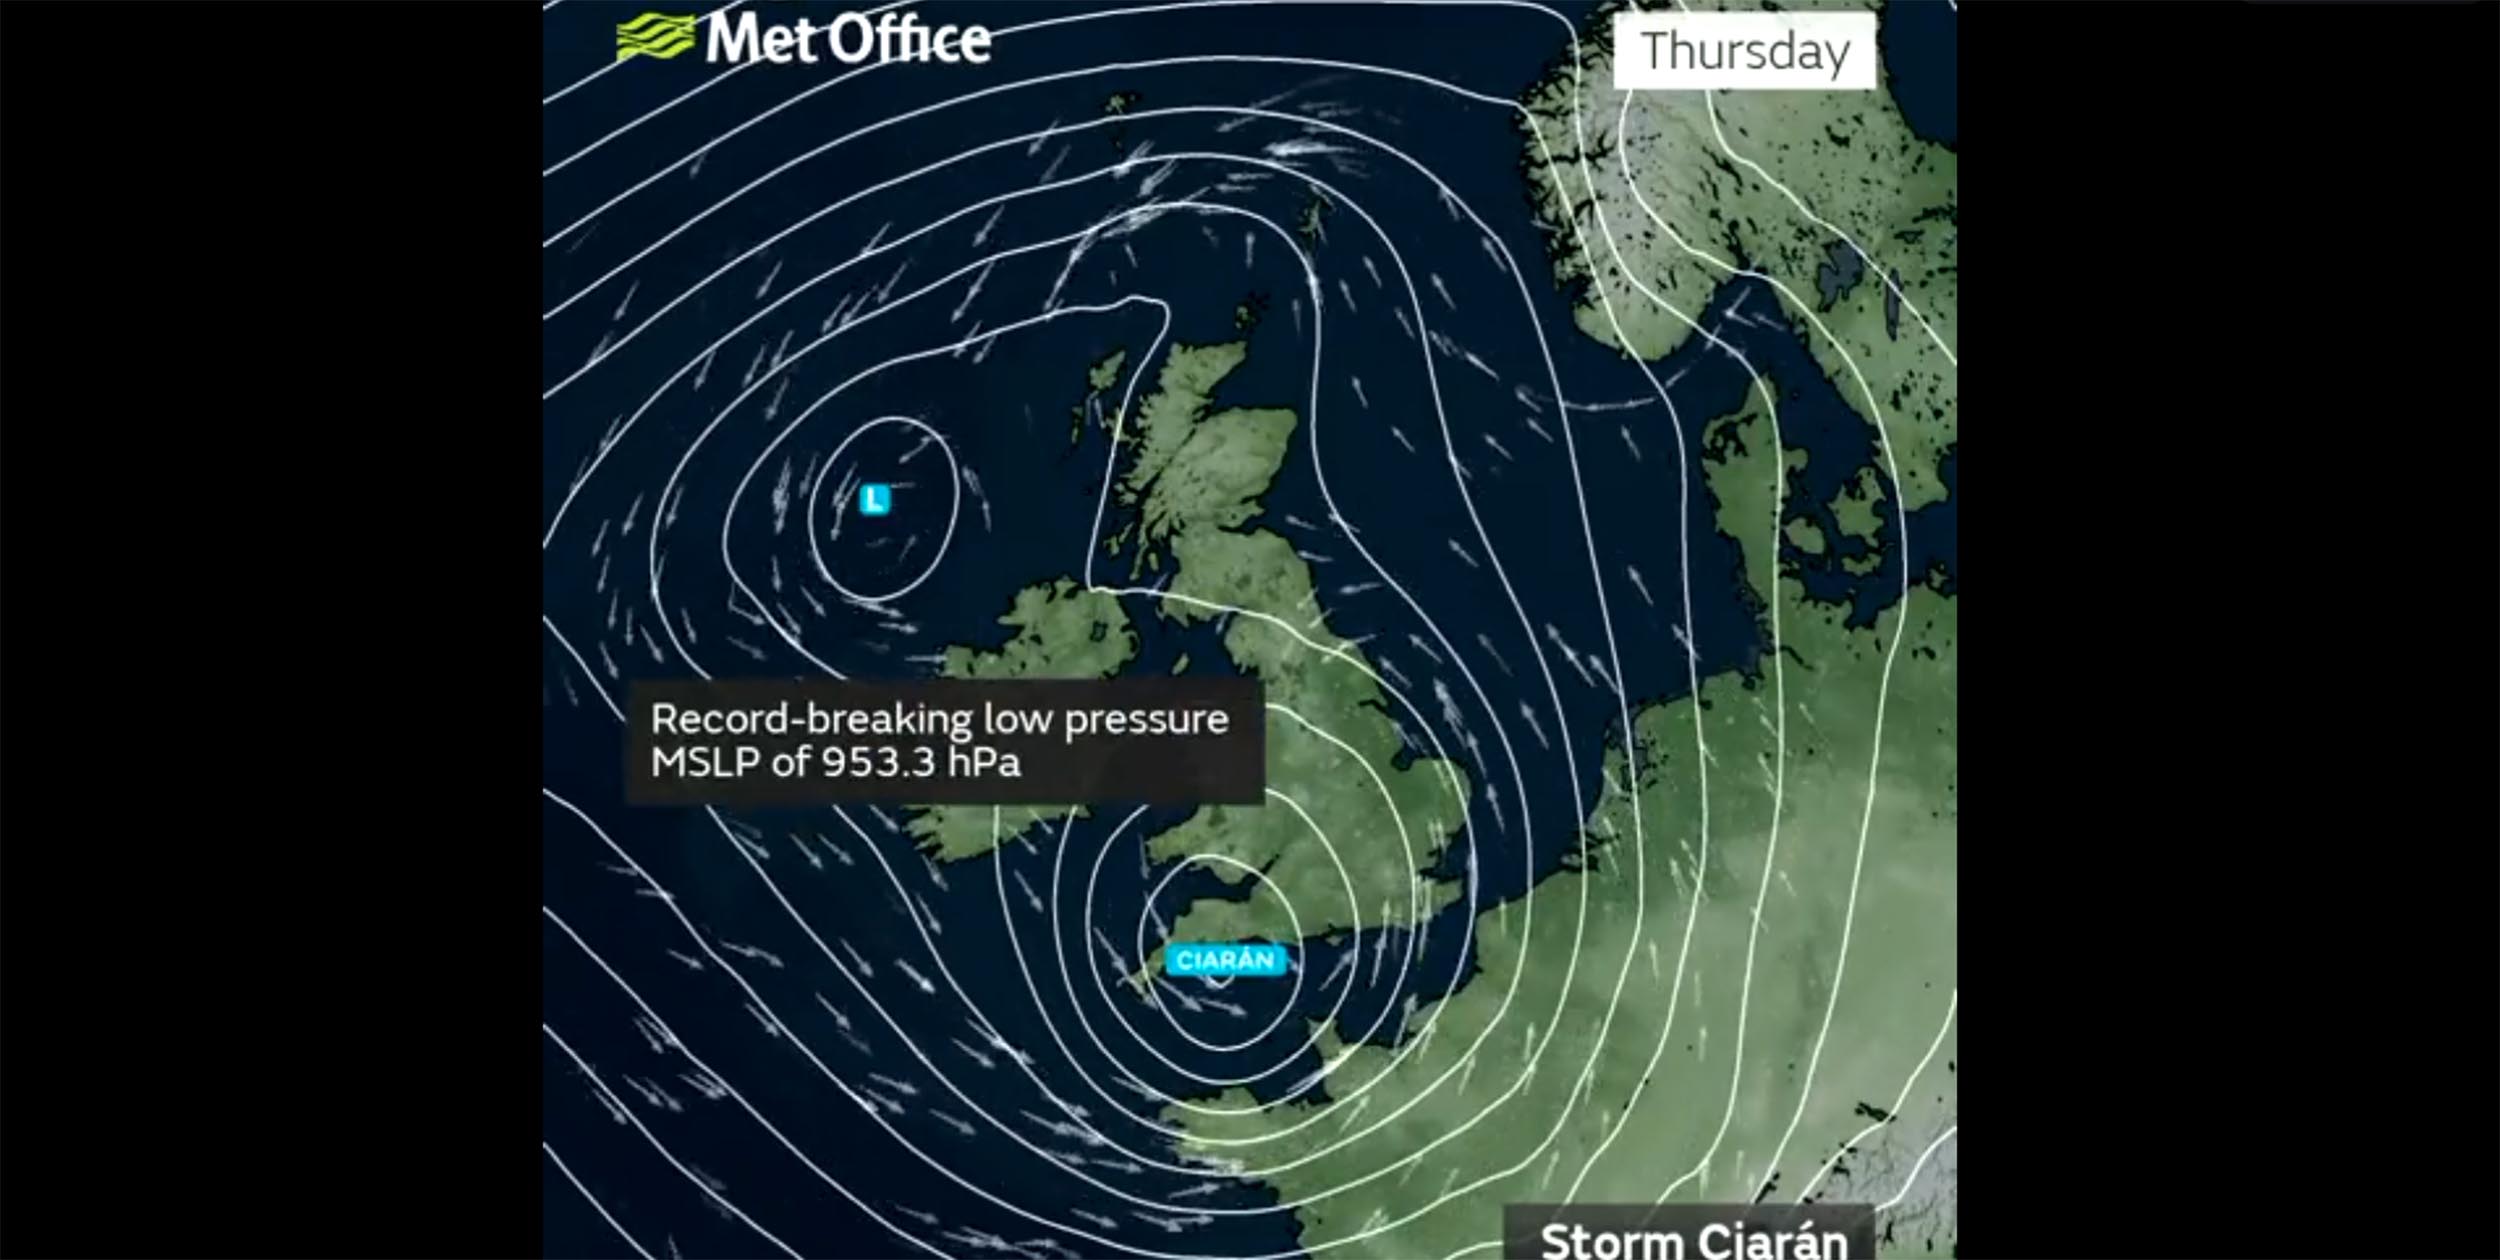 "The rate at which Storm Ciarán’s pressure dropped was exceptional..." Suzanne Gray and Ambrogio Volonté explain why the winds from Storm Ciarán in the UK and France were so strong